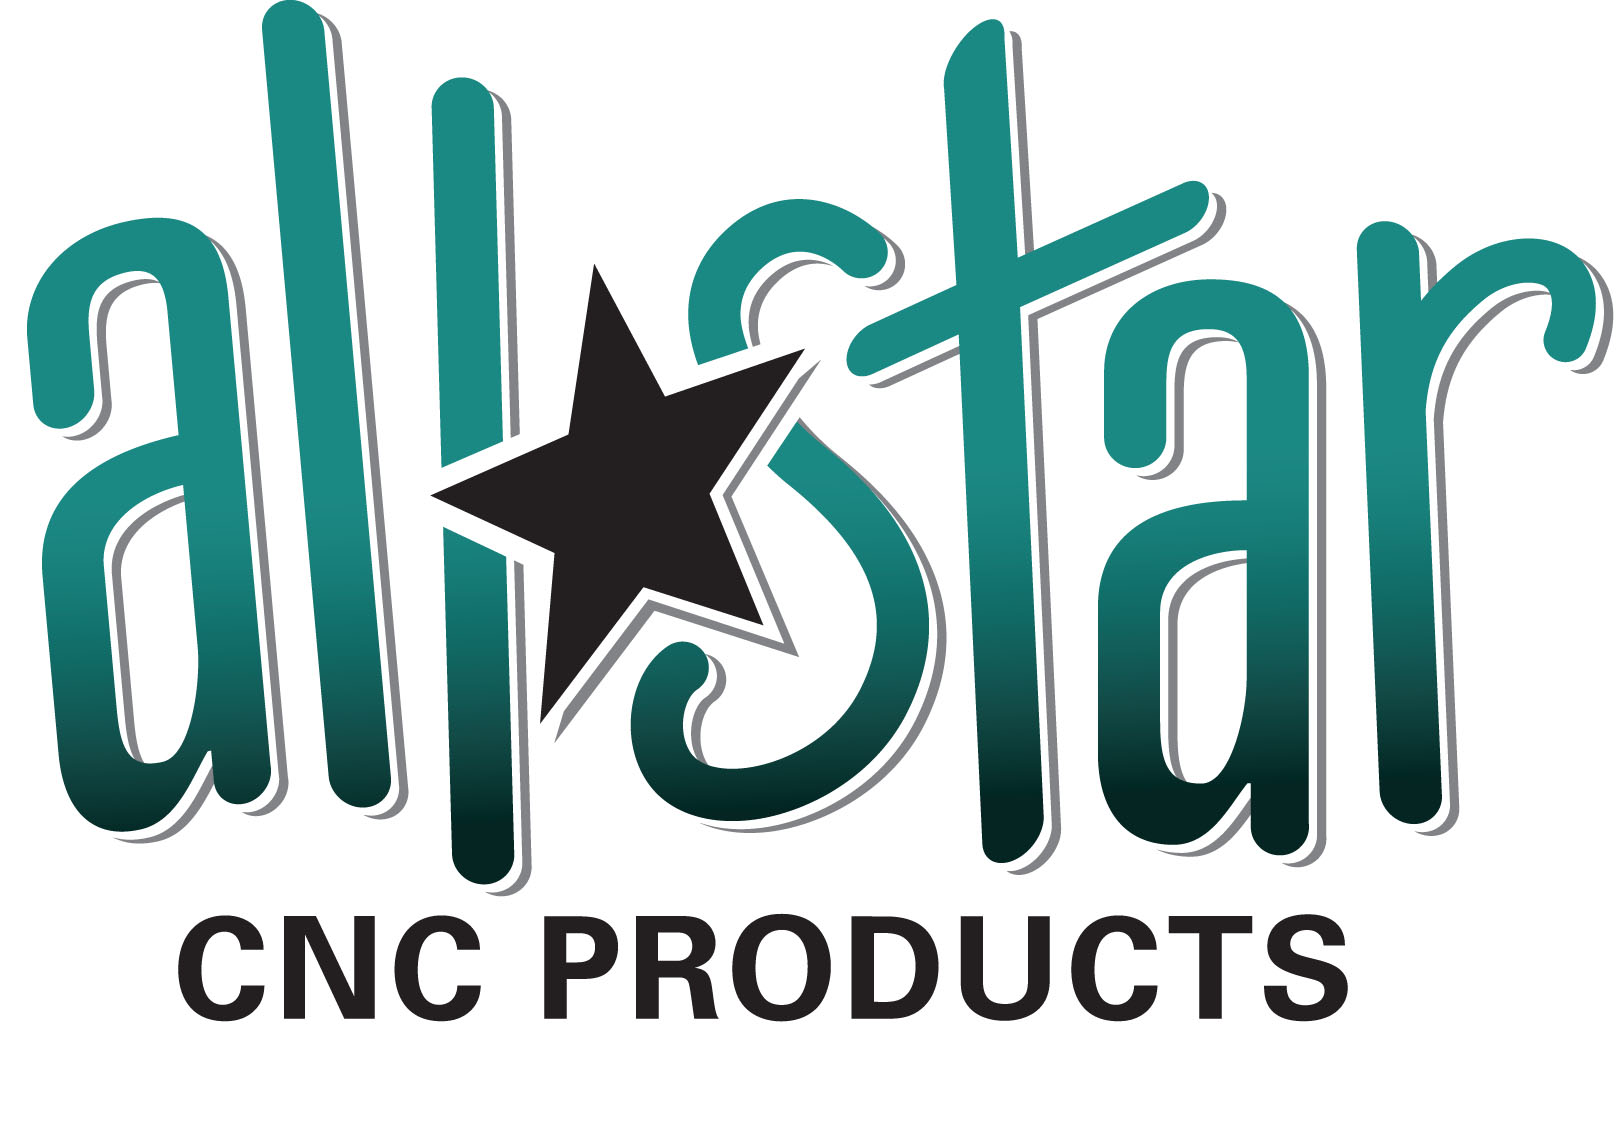  All*Star CNC Products, Inc.